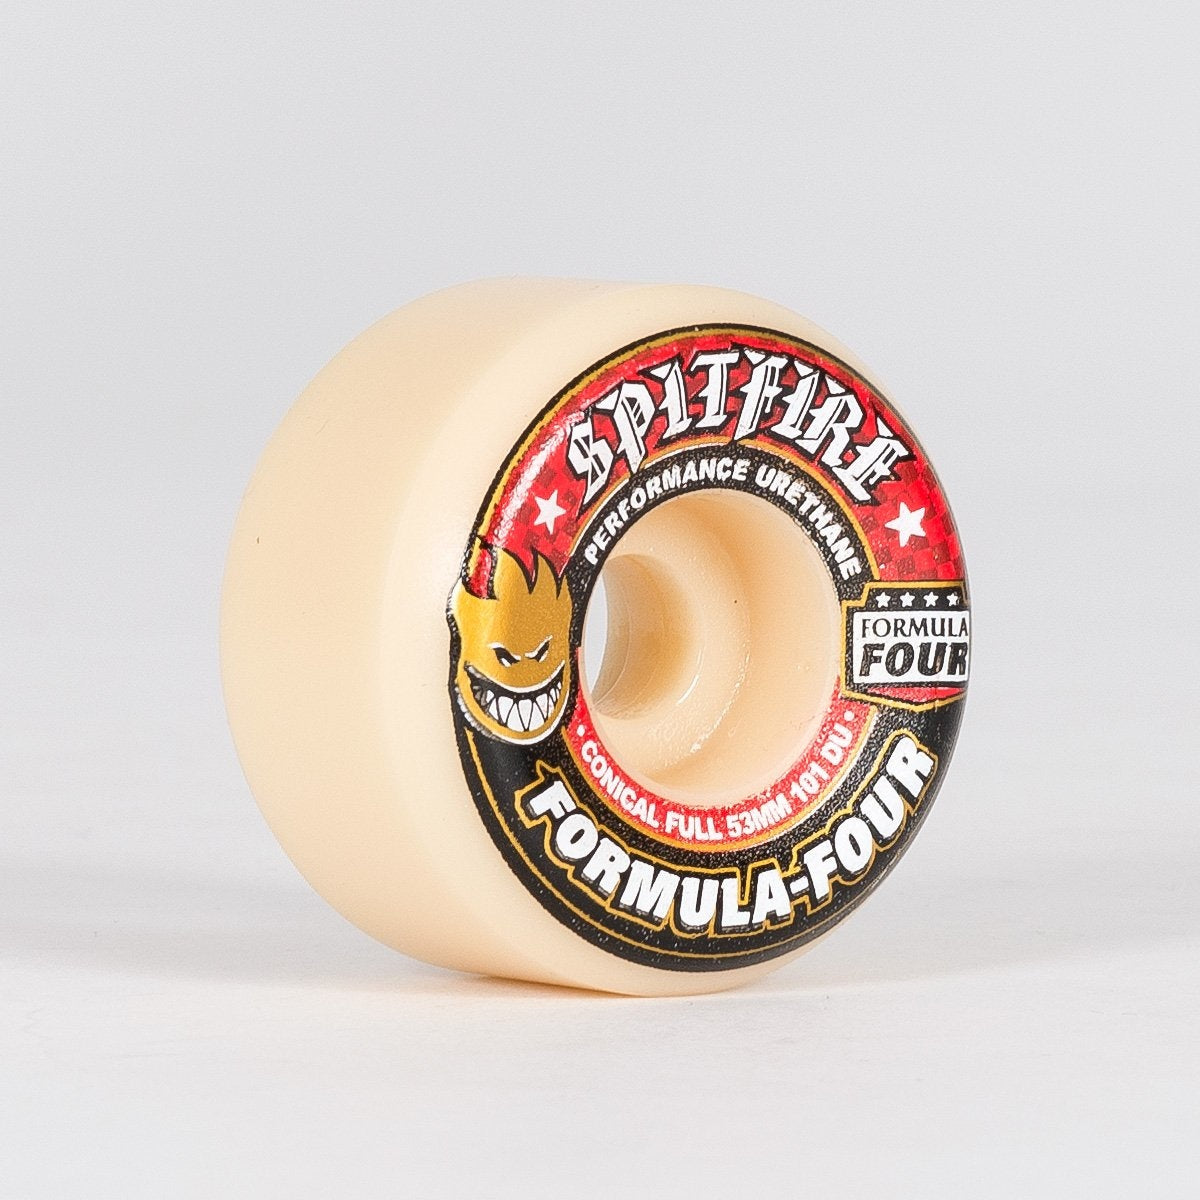 Spitfire Formula Four Conical Full 101a Wheels White/Red 53mm - Skateboard